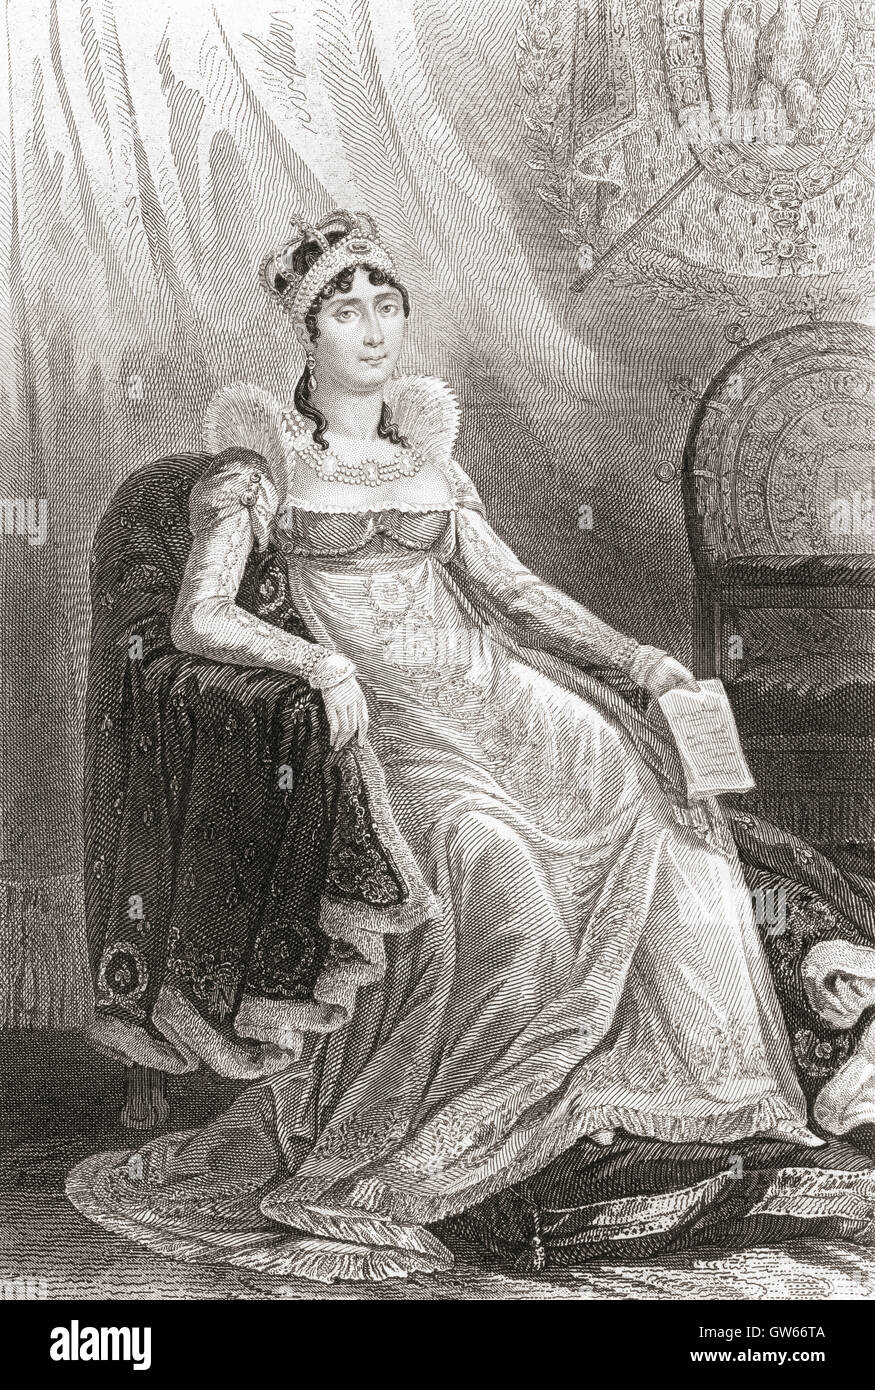 Joséphine de Beauharnais, née Tascher de la Pagerie, 1763 – 1814.  First wife of Napoleon I and first Empress of the French. Stock Photo